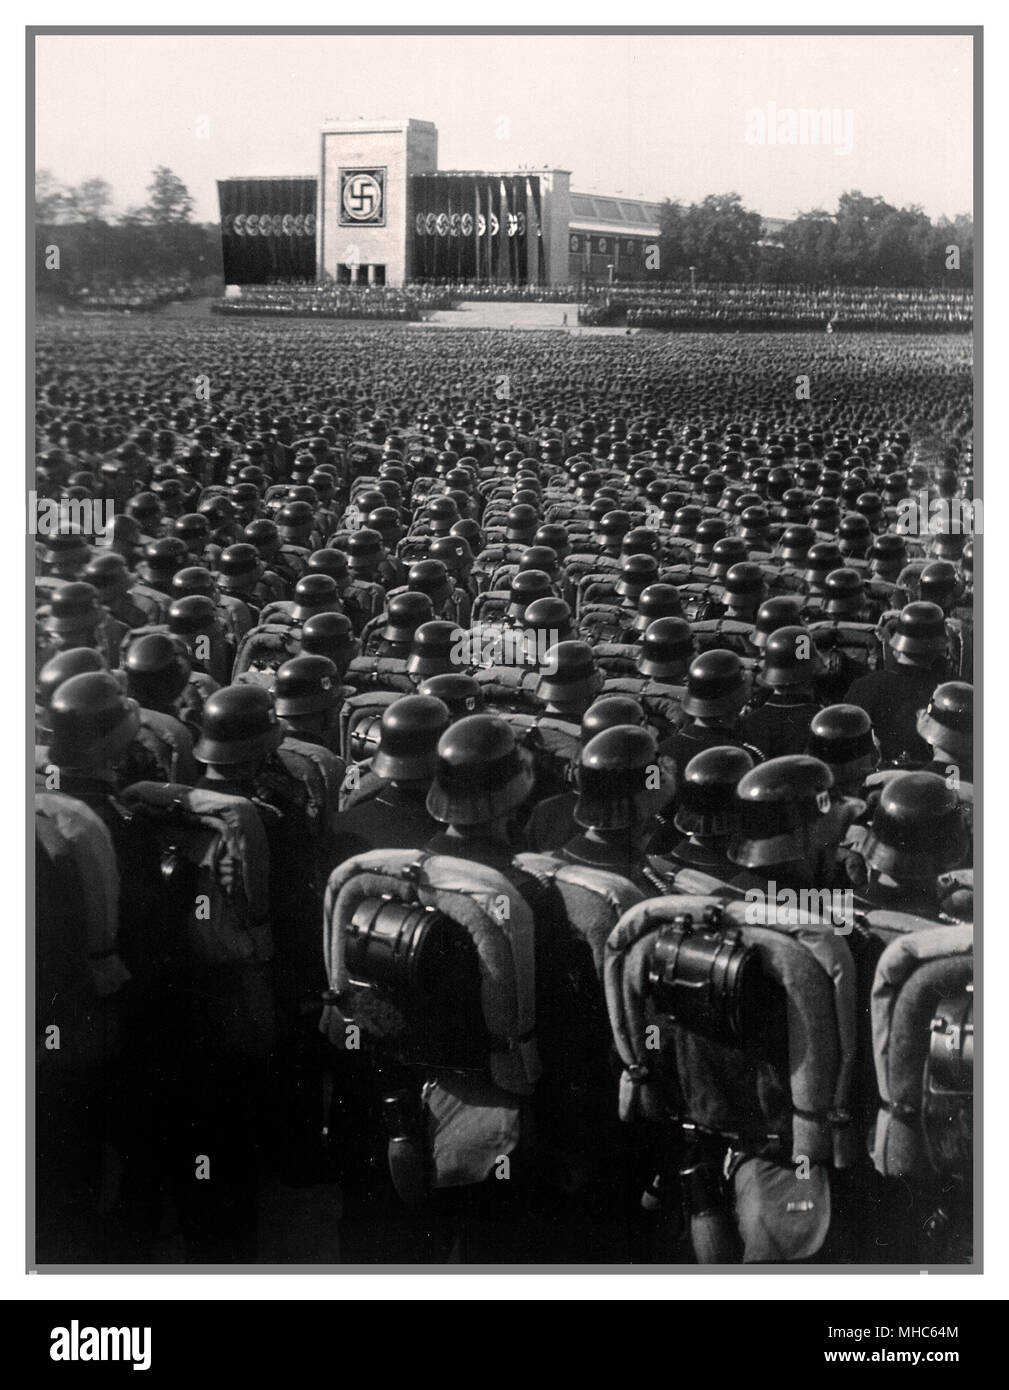 Nazi Waffen SS troops wearing polished helmets in precise serried ranks standing at salute during a German Nazi rally pre-World War II Nuremberg 1930's Stock Photo